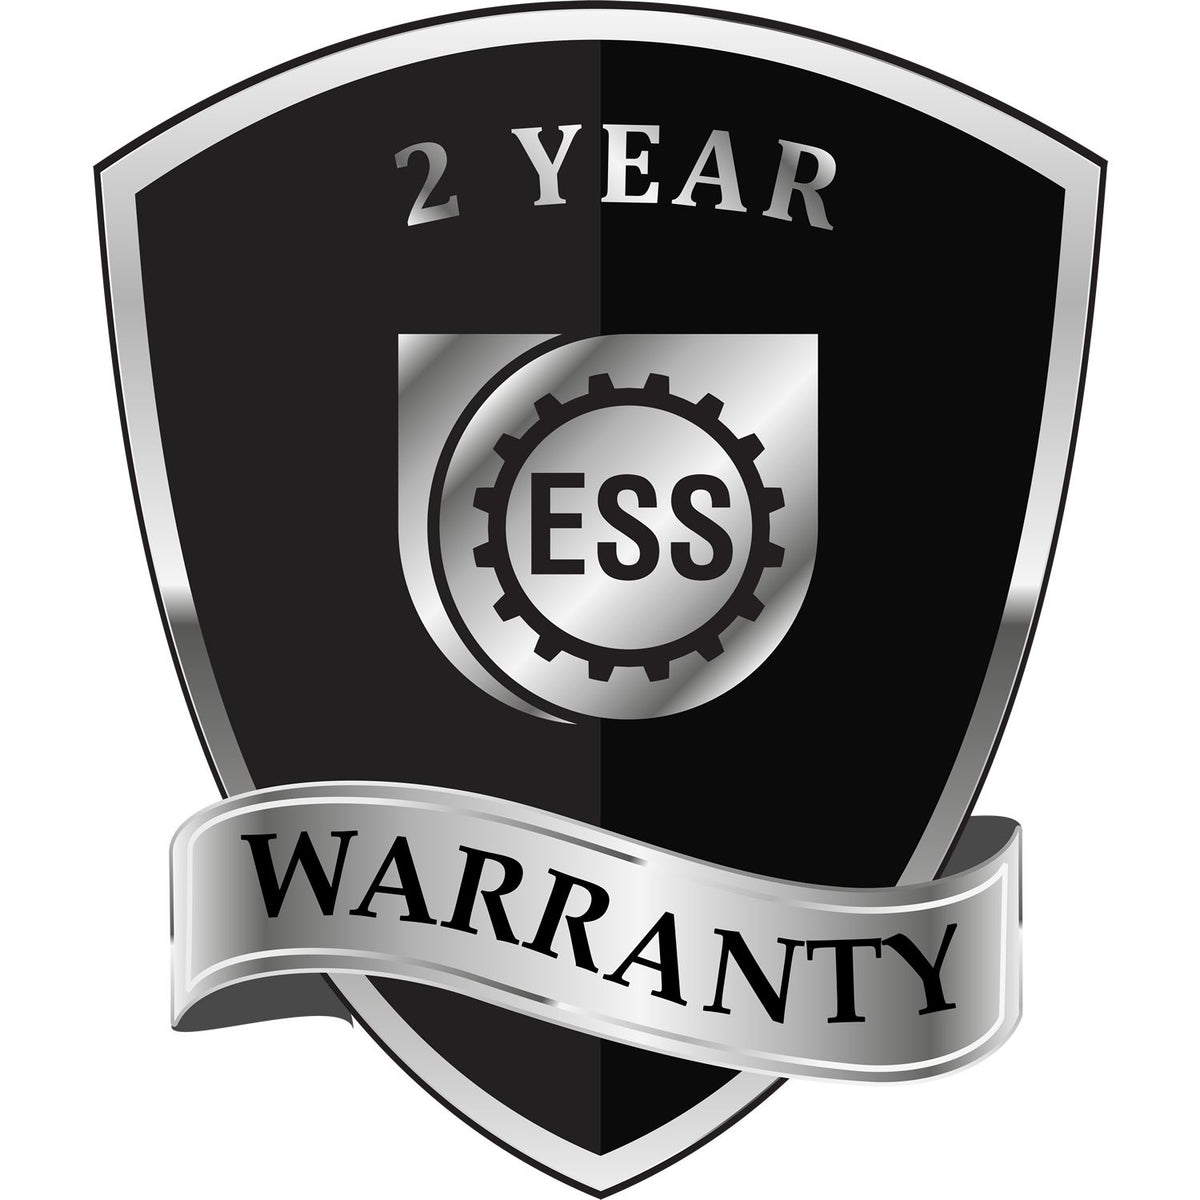 A badge or emblem showing a warranty icon for the Soft Indiana Professional Engineer Seal